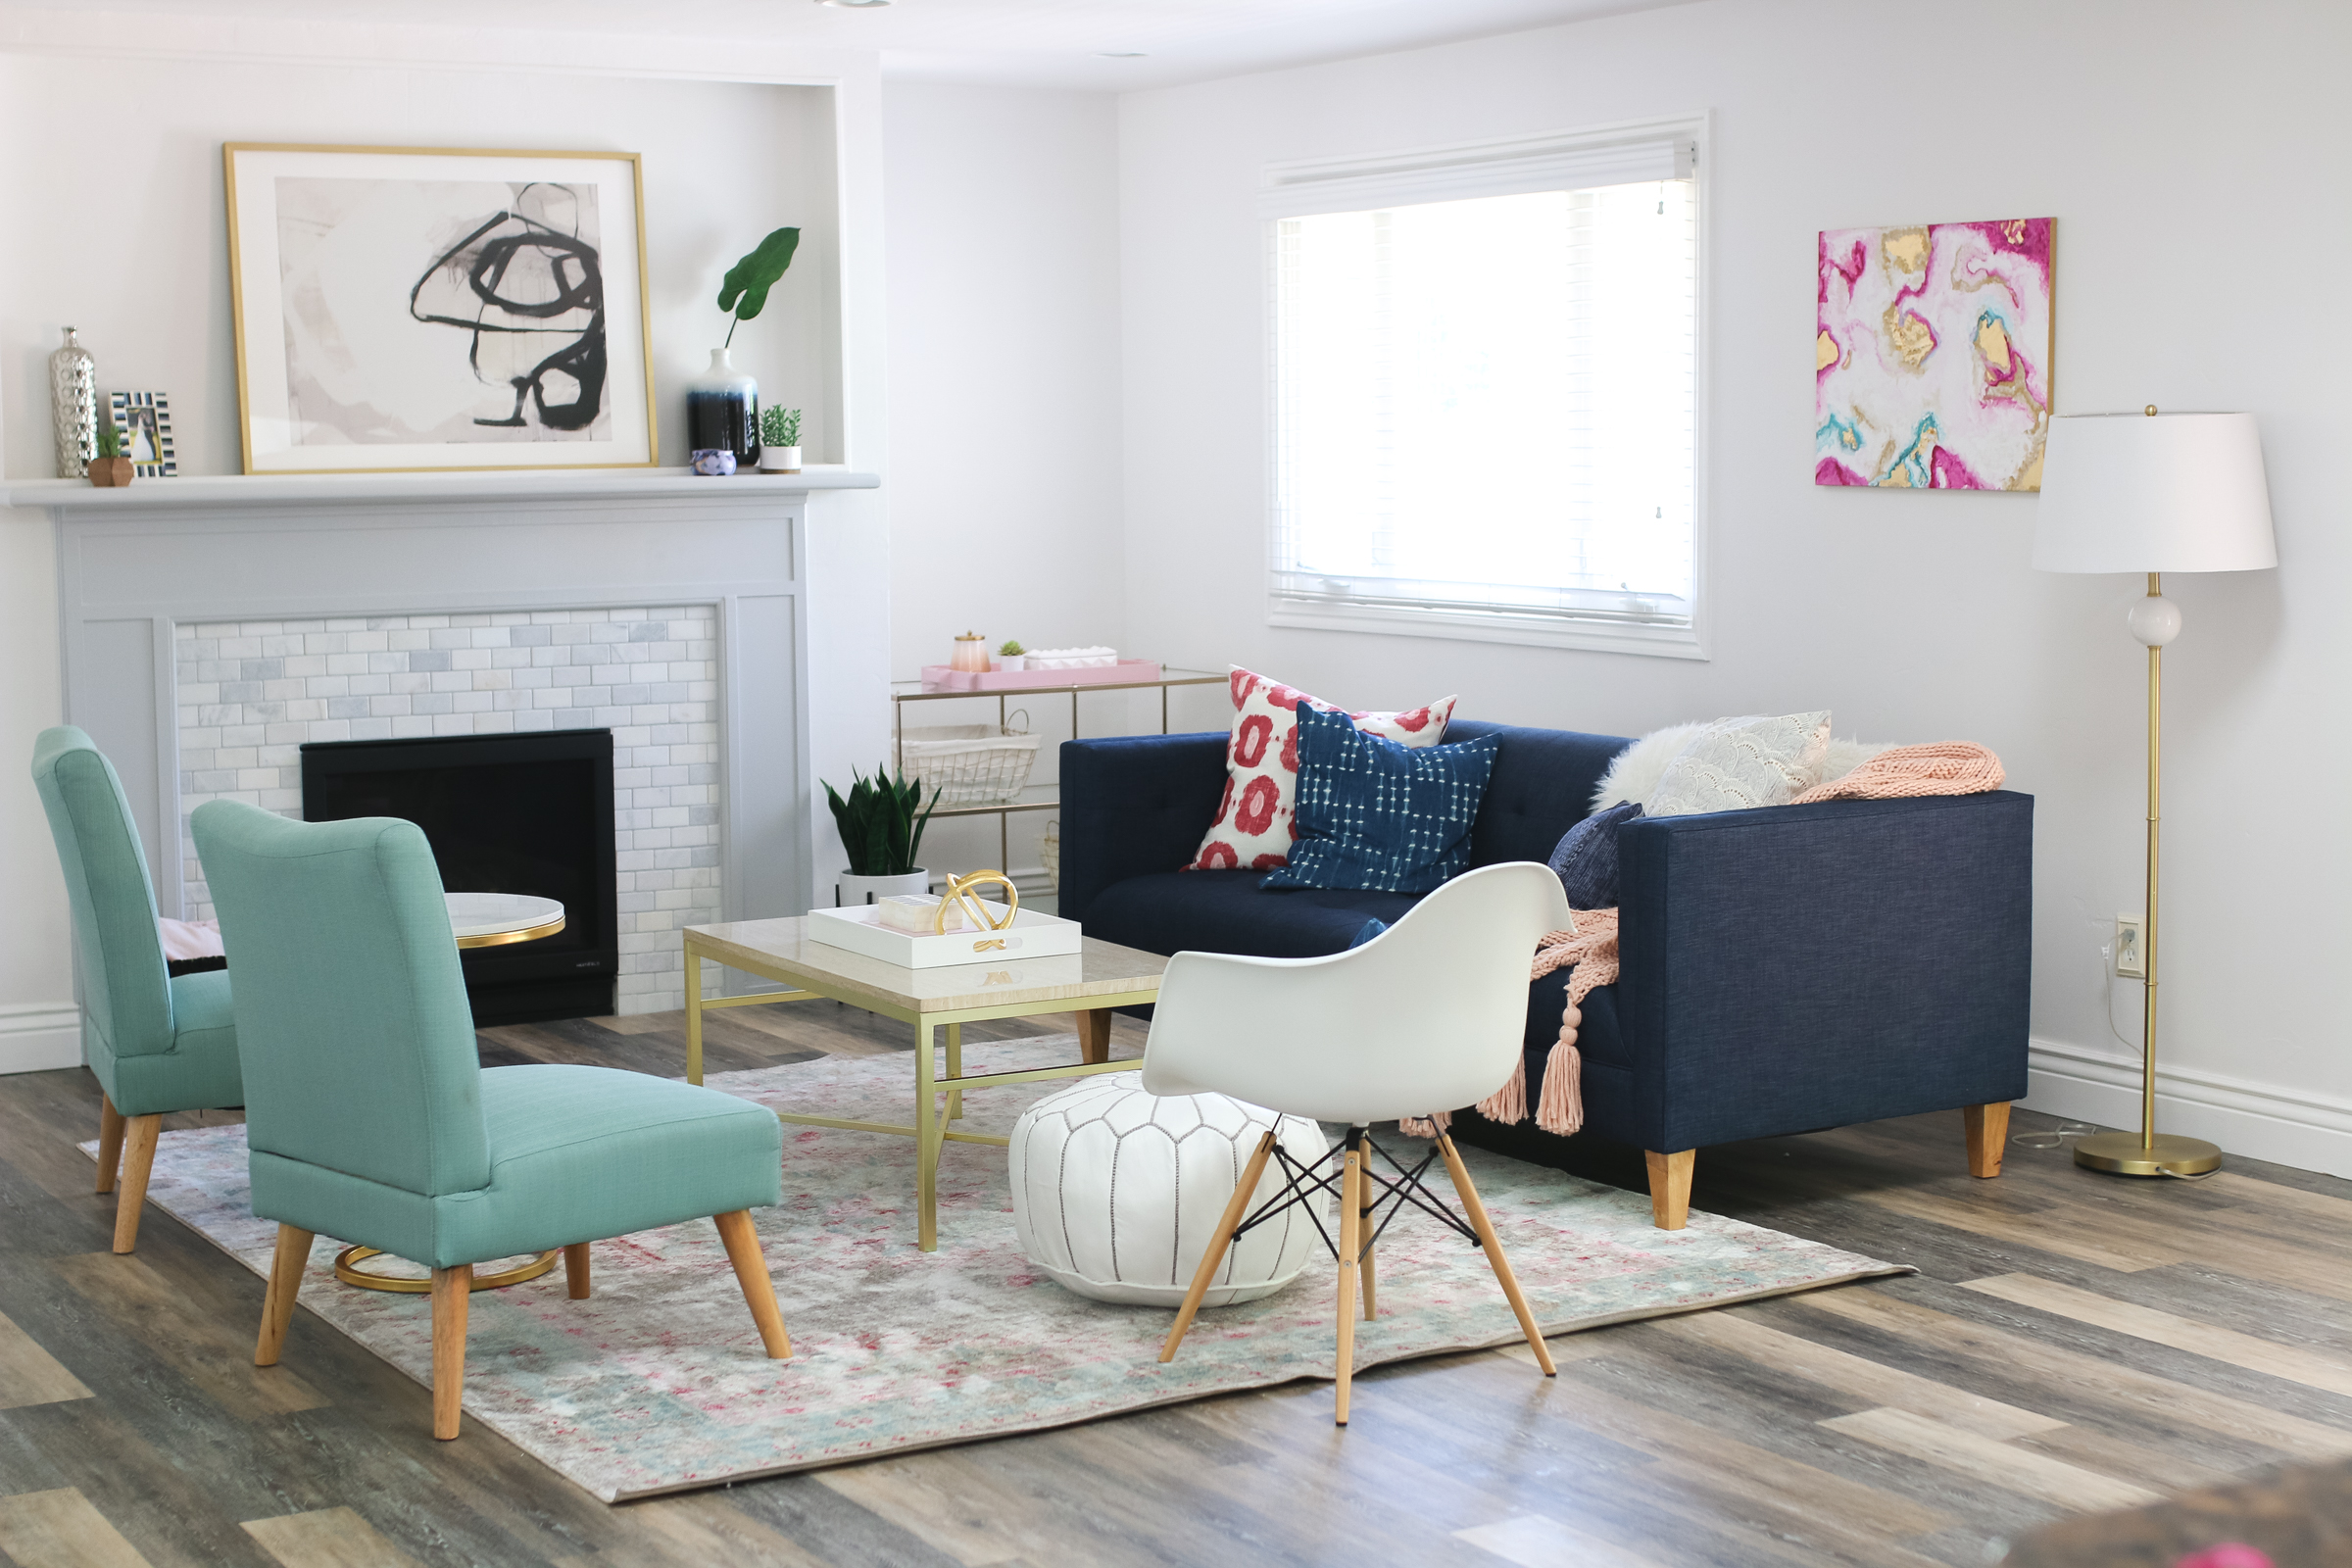 Our New Home Big Reveal: Our Modern Living Room With Hints of Gold by Utah blogger Sandy A La Mode